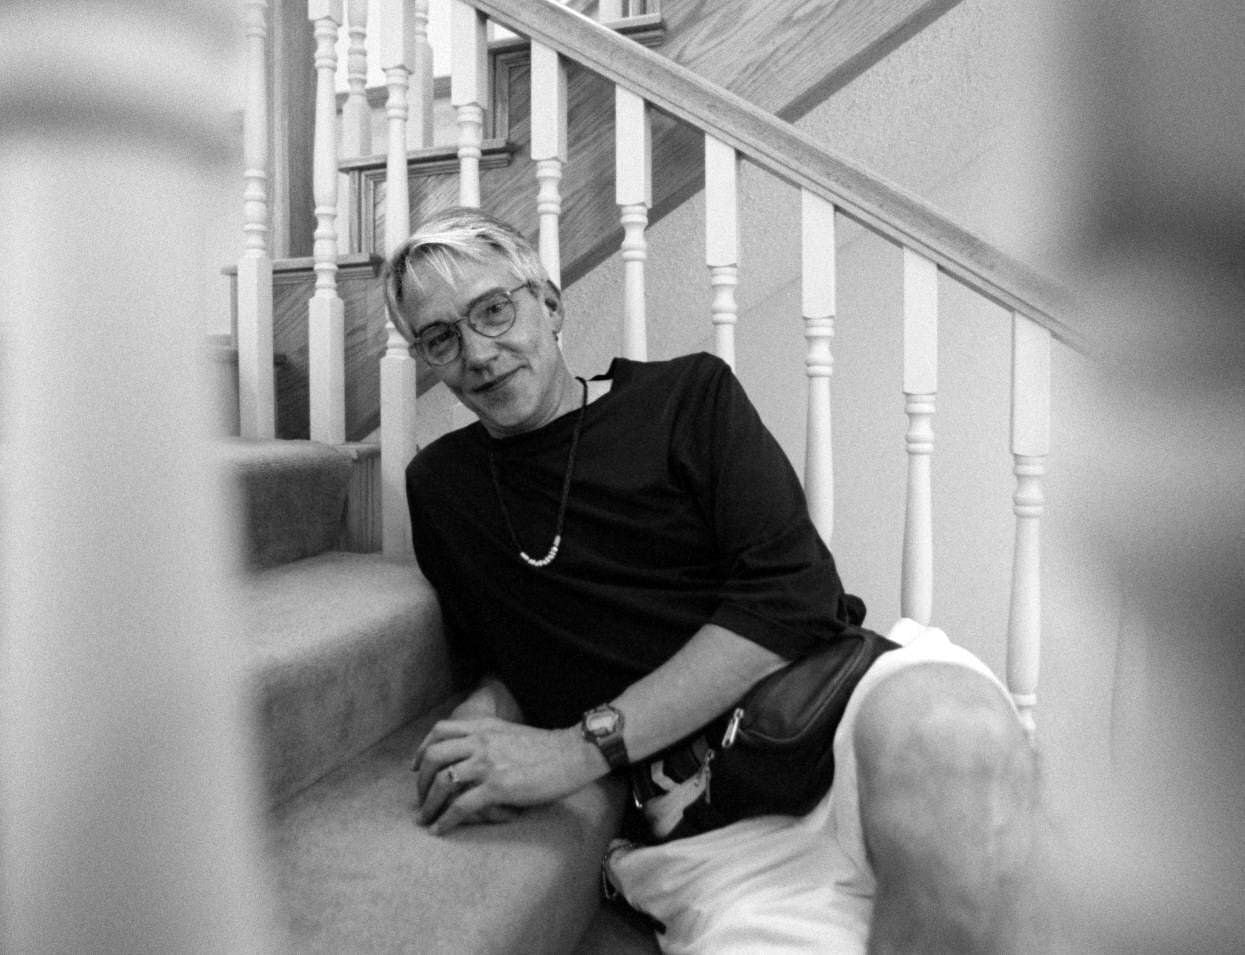 Don Maison, former president and CEO of AIDS Services of Dallas, sat on the staircase at the...